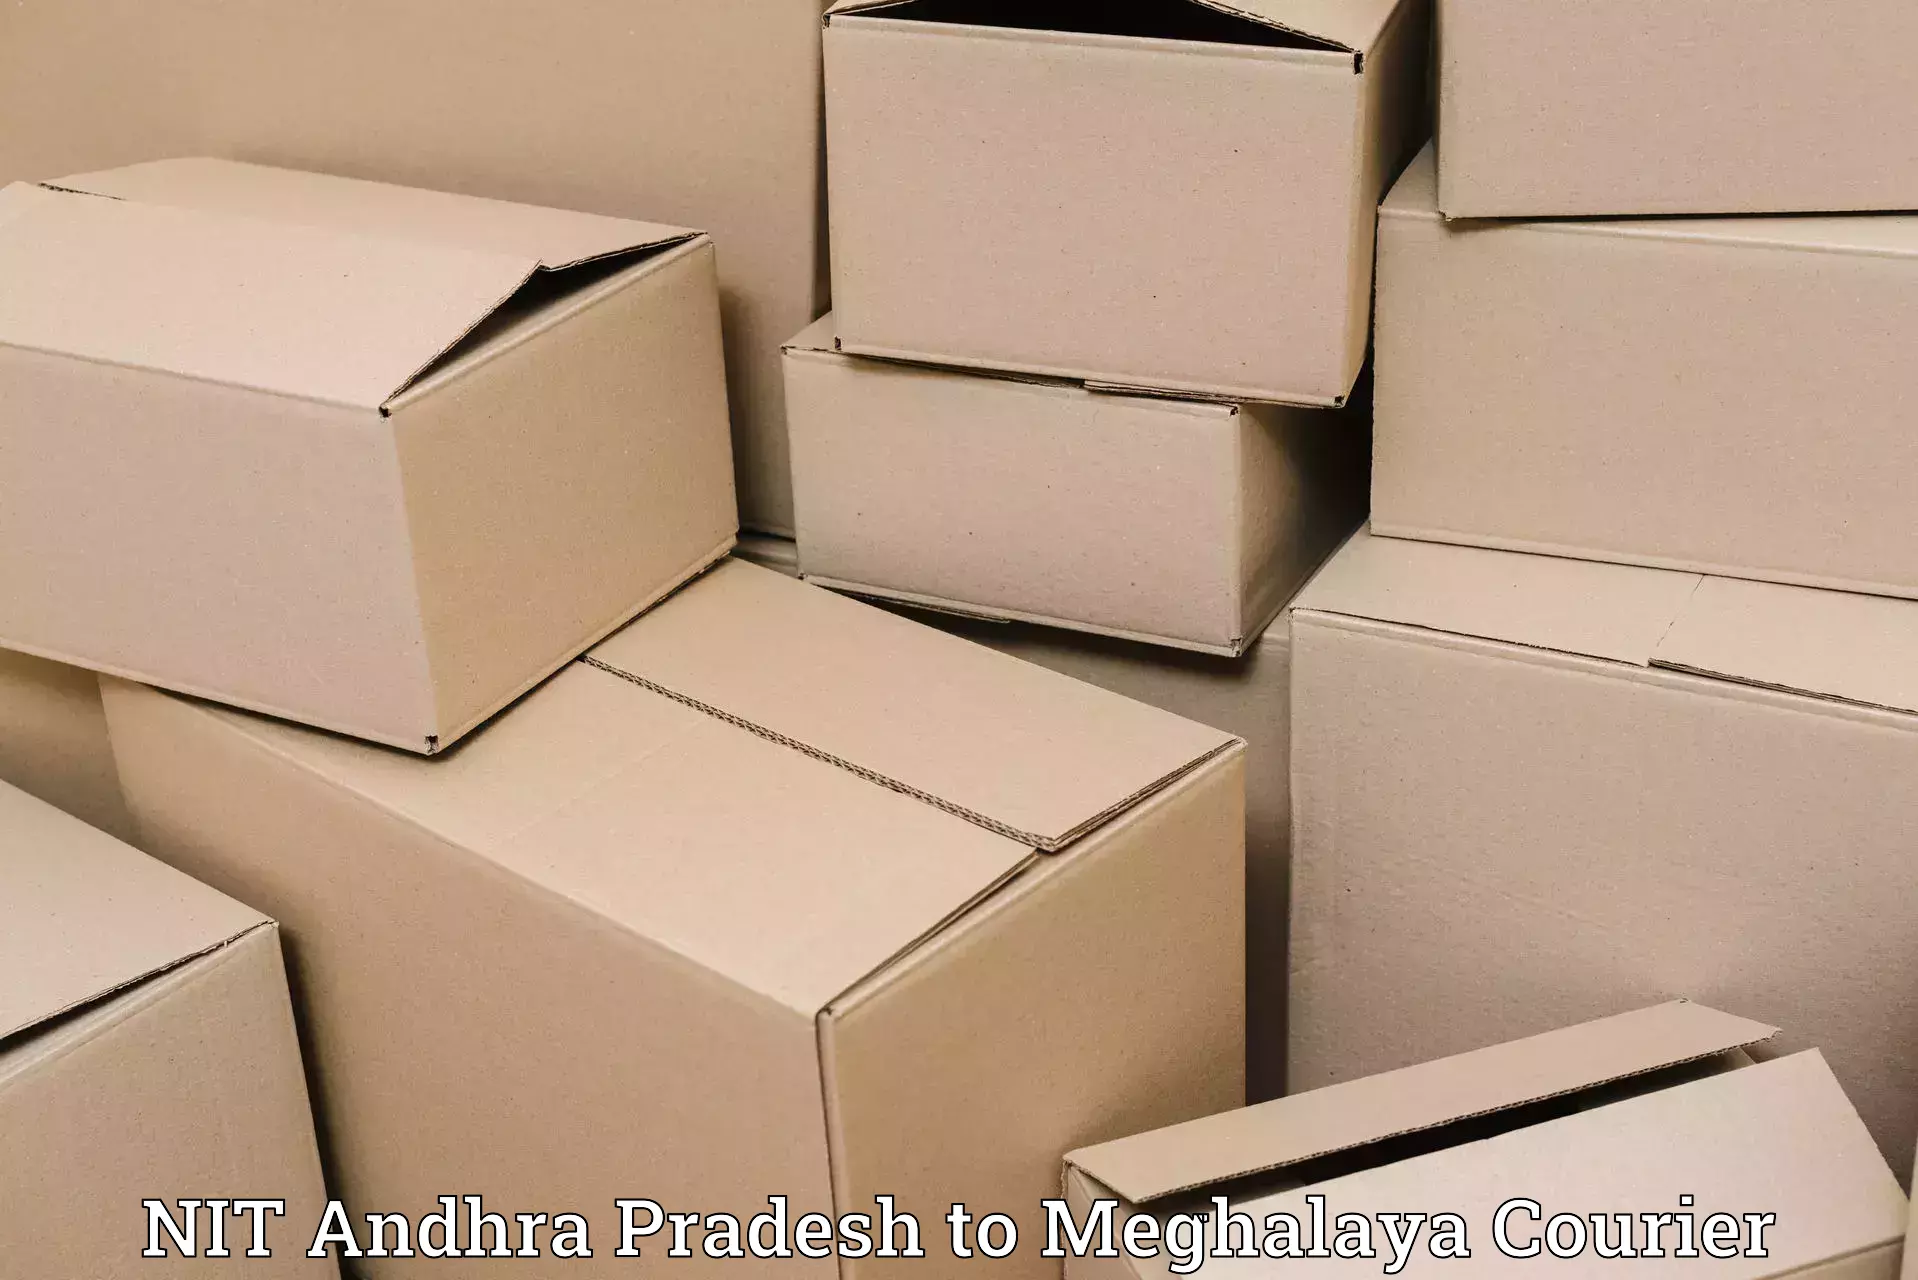 Easy access courier services in NIT Andhra Pradesh to NIT Meghalaya